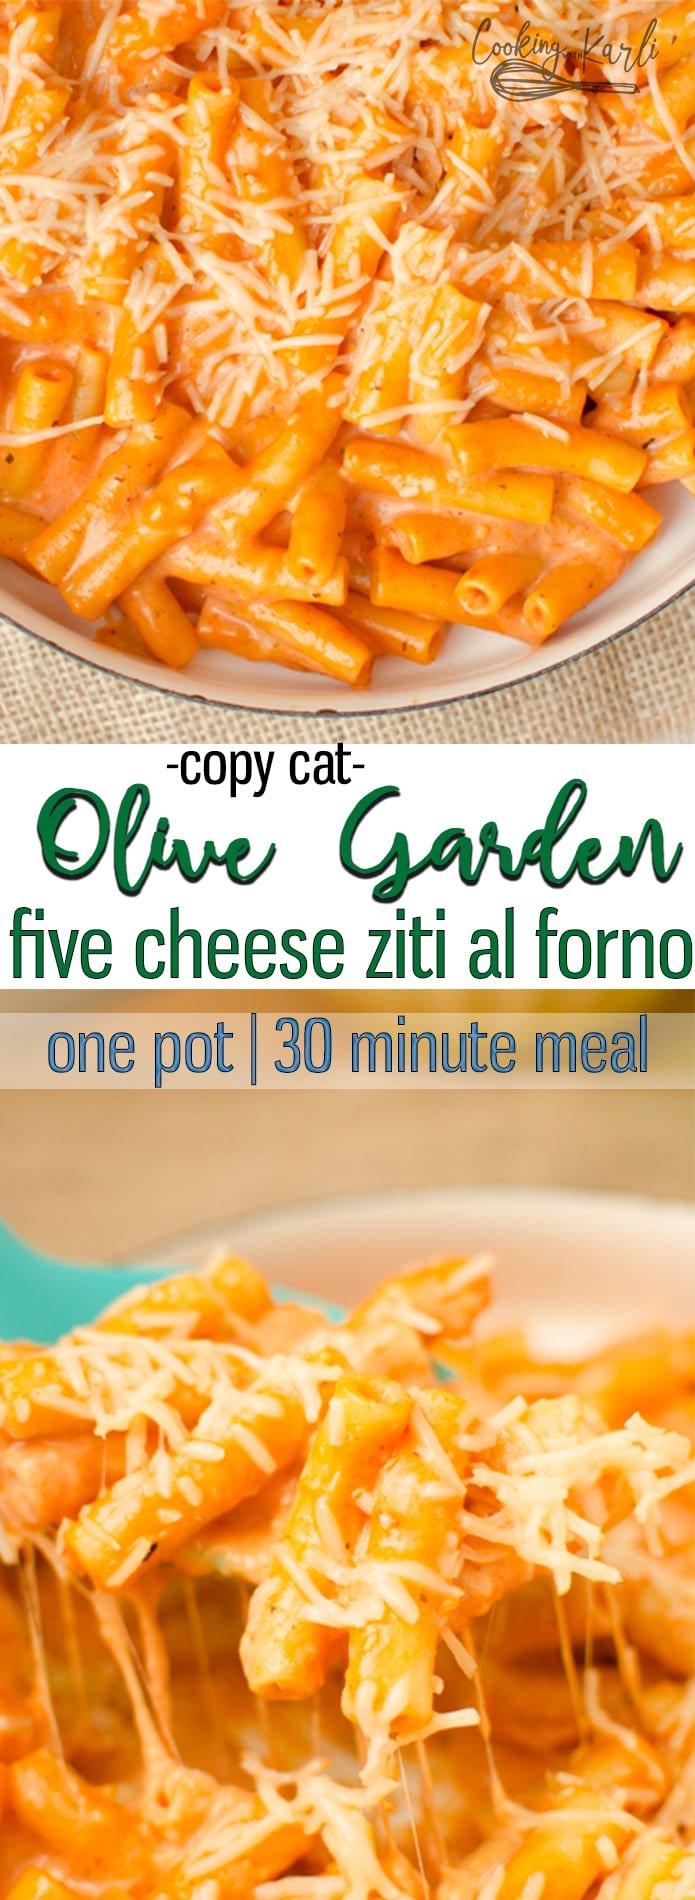 One Pot Creamy Ziti Pasta tastes even better than Ziti dishes you'd order from a restaurant! This One Pot meal is a fast, easy, dump and go dinner that won't leave you with a sink full of dishes! All it takes is a handful of ingredients to create this Pasta dish. |Cooking with Karli| #zitibake #copycat #olivegarden #creamyziti #onepot #30minmeal #fast #easy